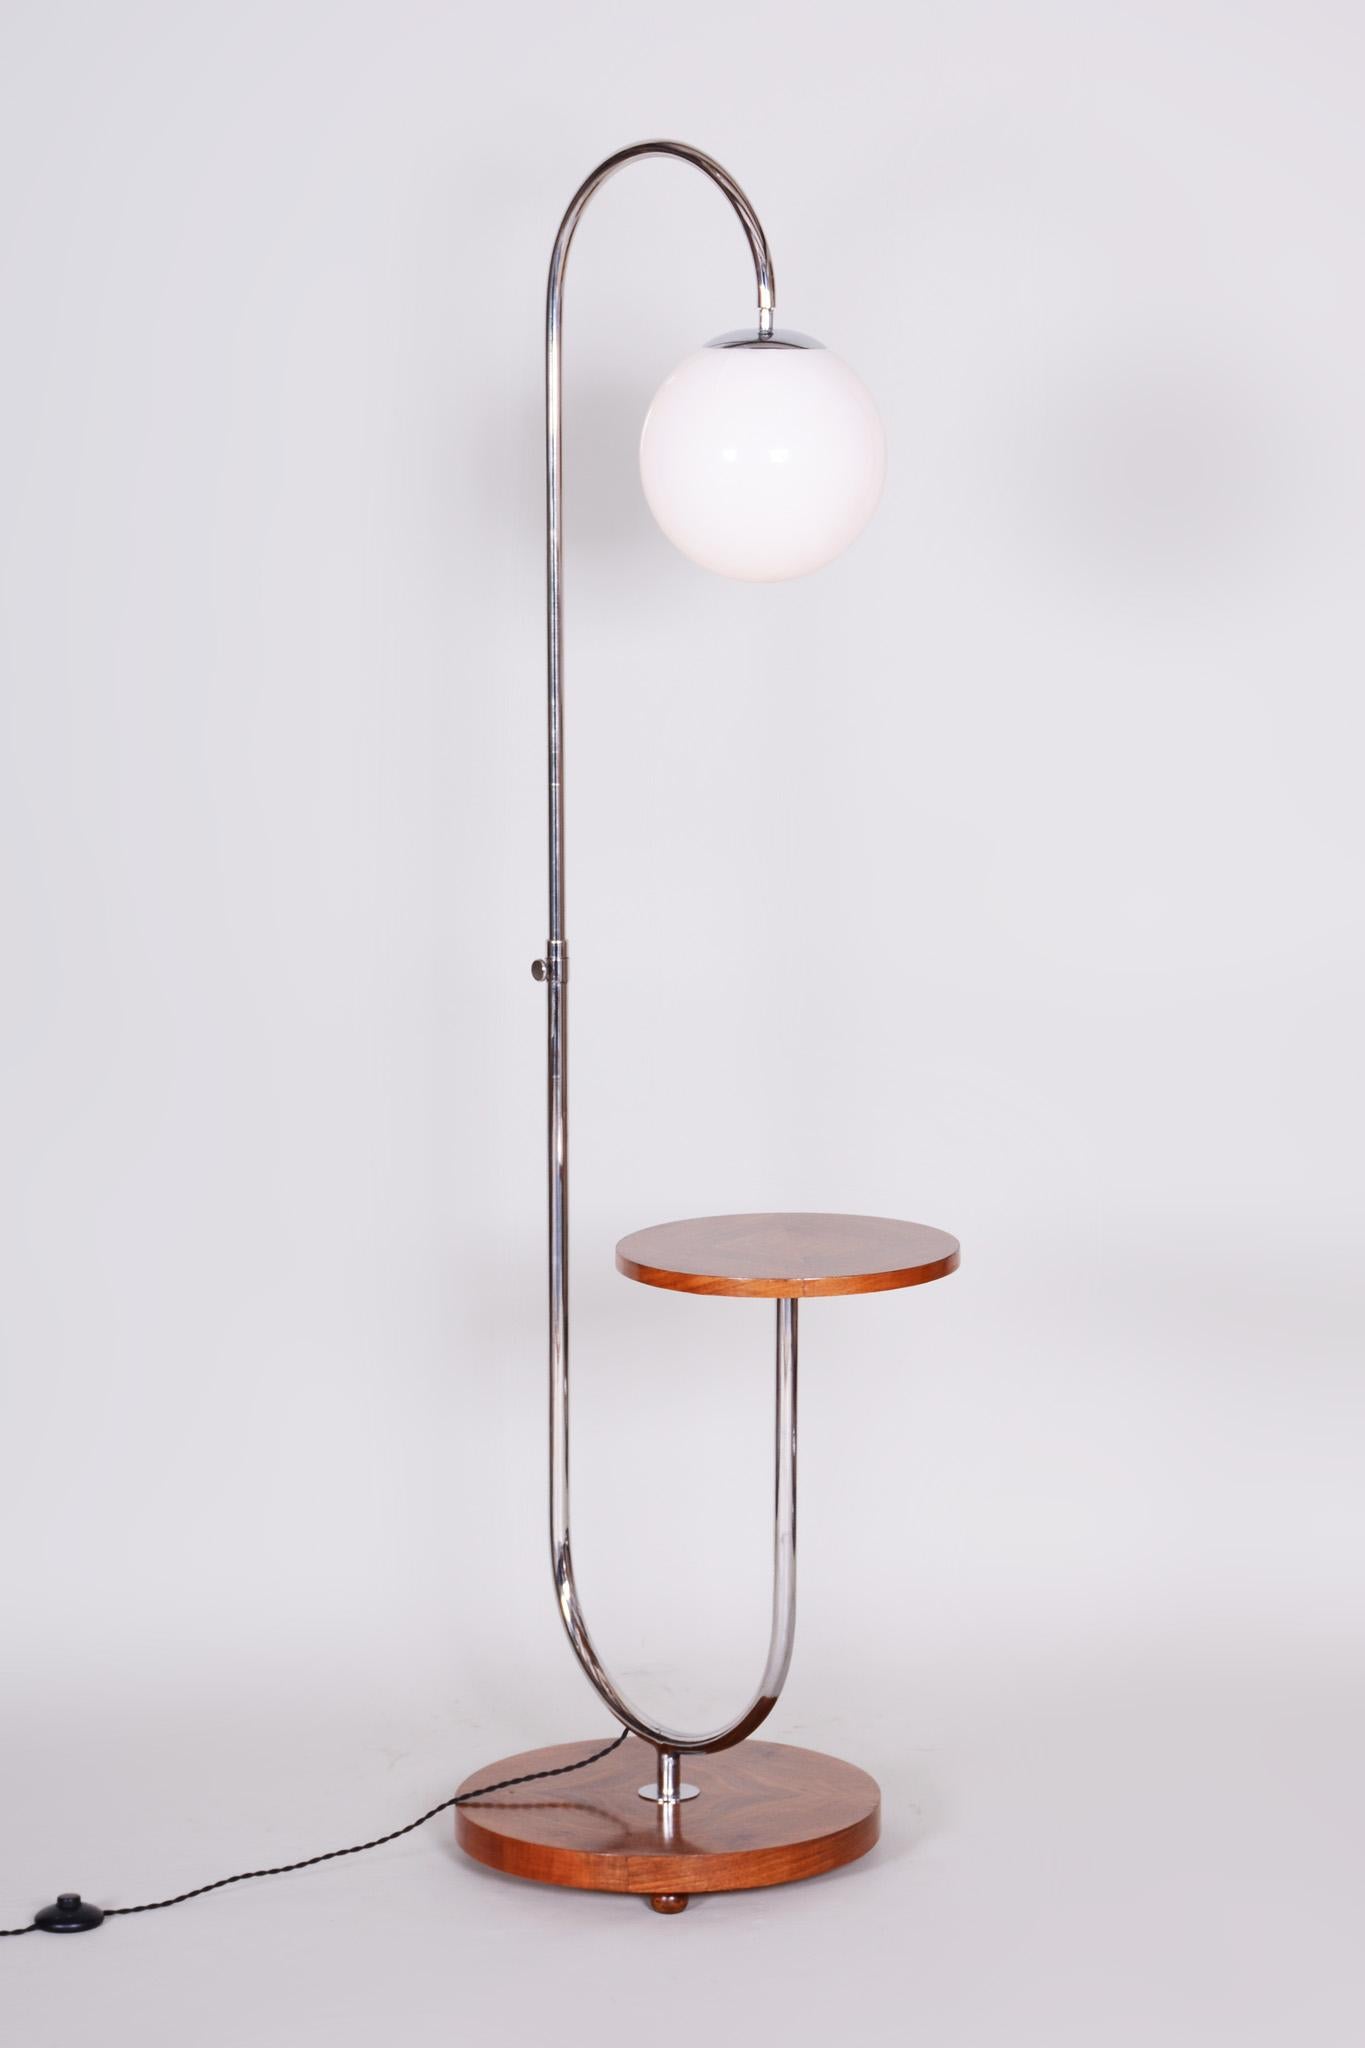 Style: Bauhaus.
Period: 1930-1939.

Measures: Adjustable height 130 - 184 cm





     